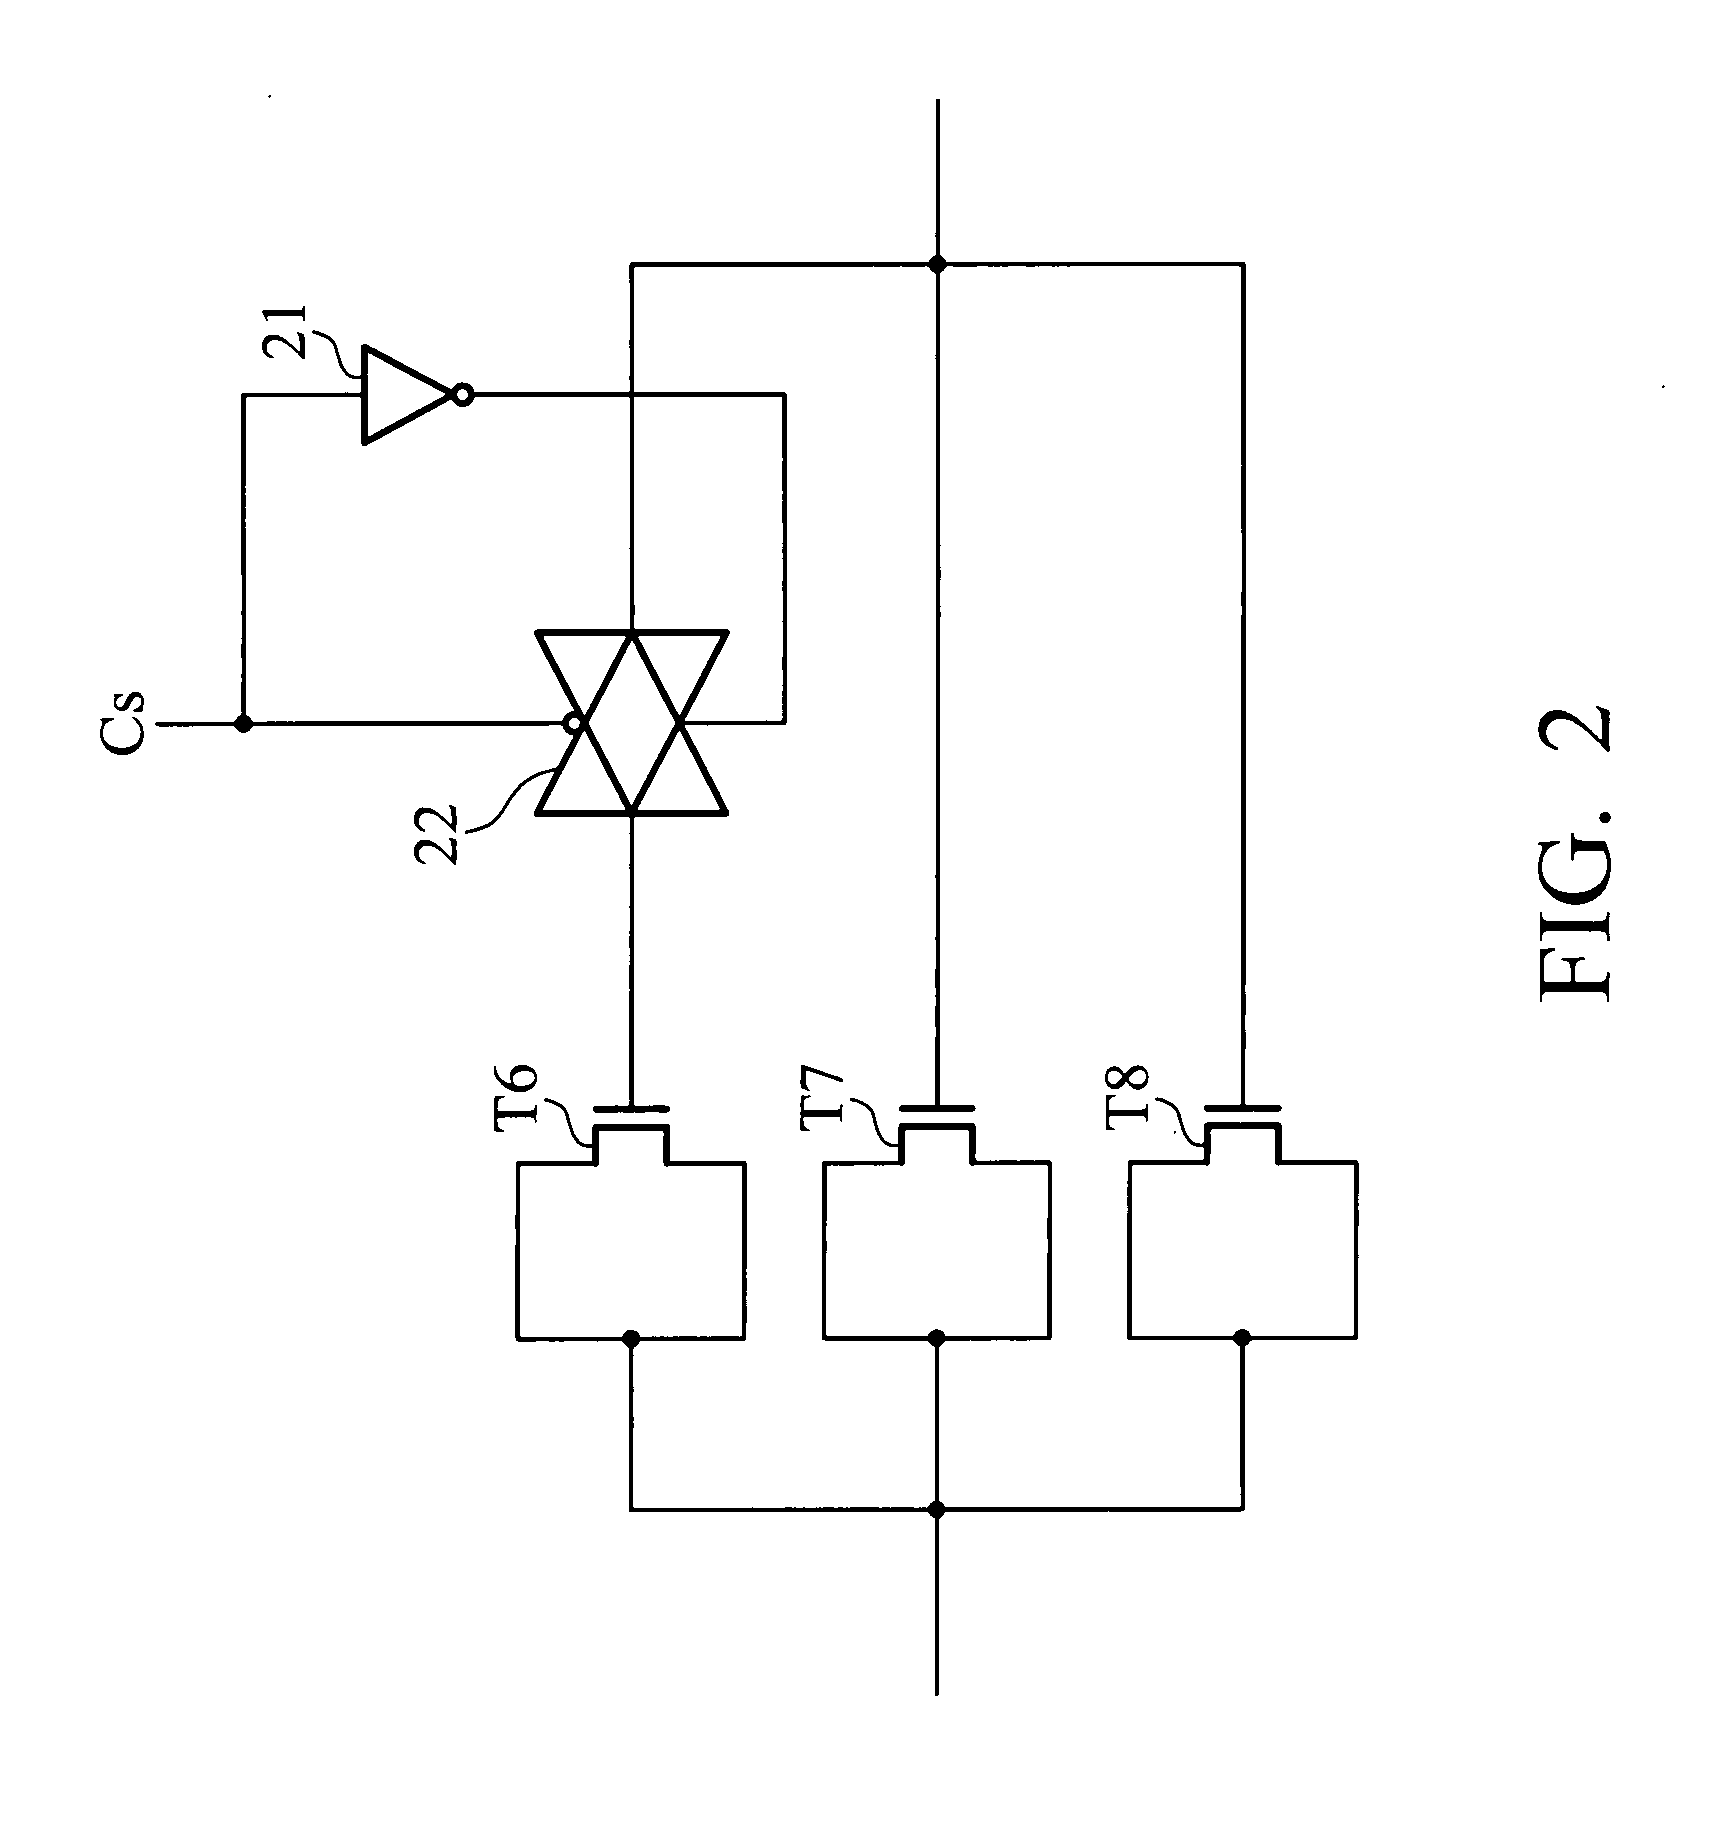 Boost circuit and level shifter